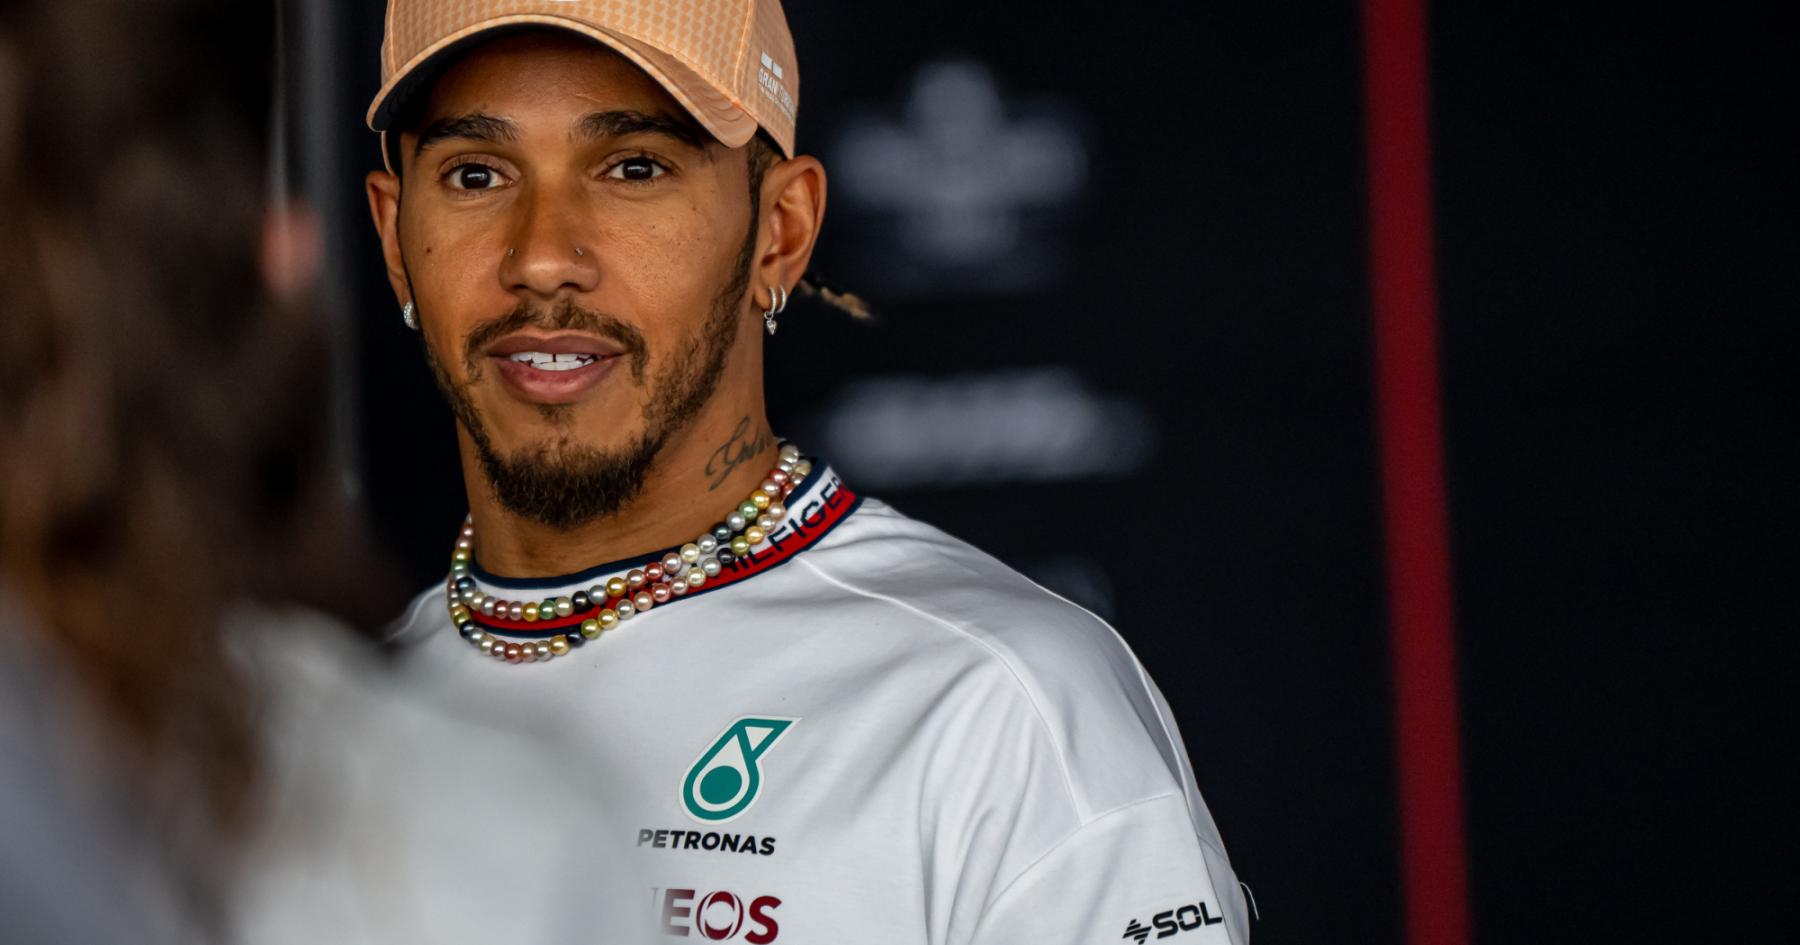 F1 world stunned as Hamilton finally speaks out after ground-breaking Mercedes exit